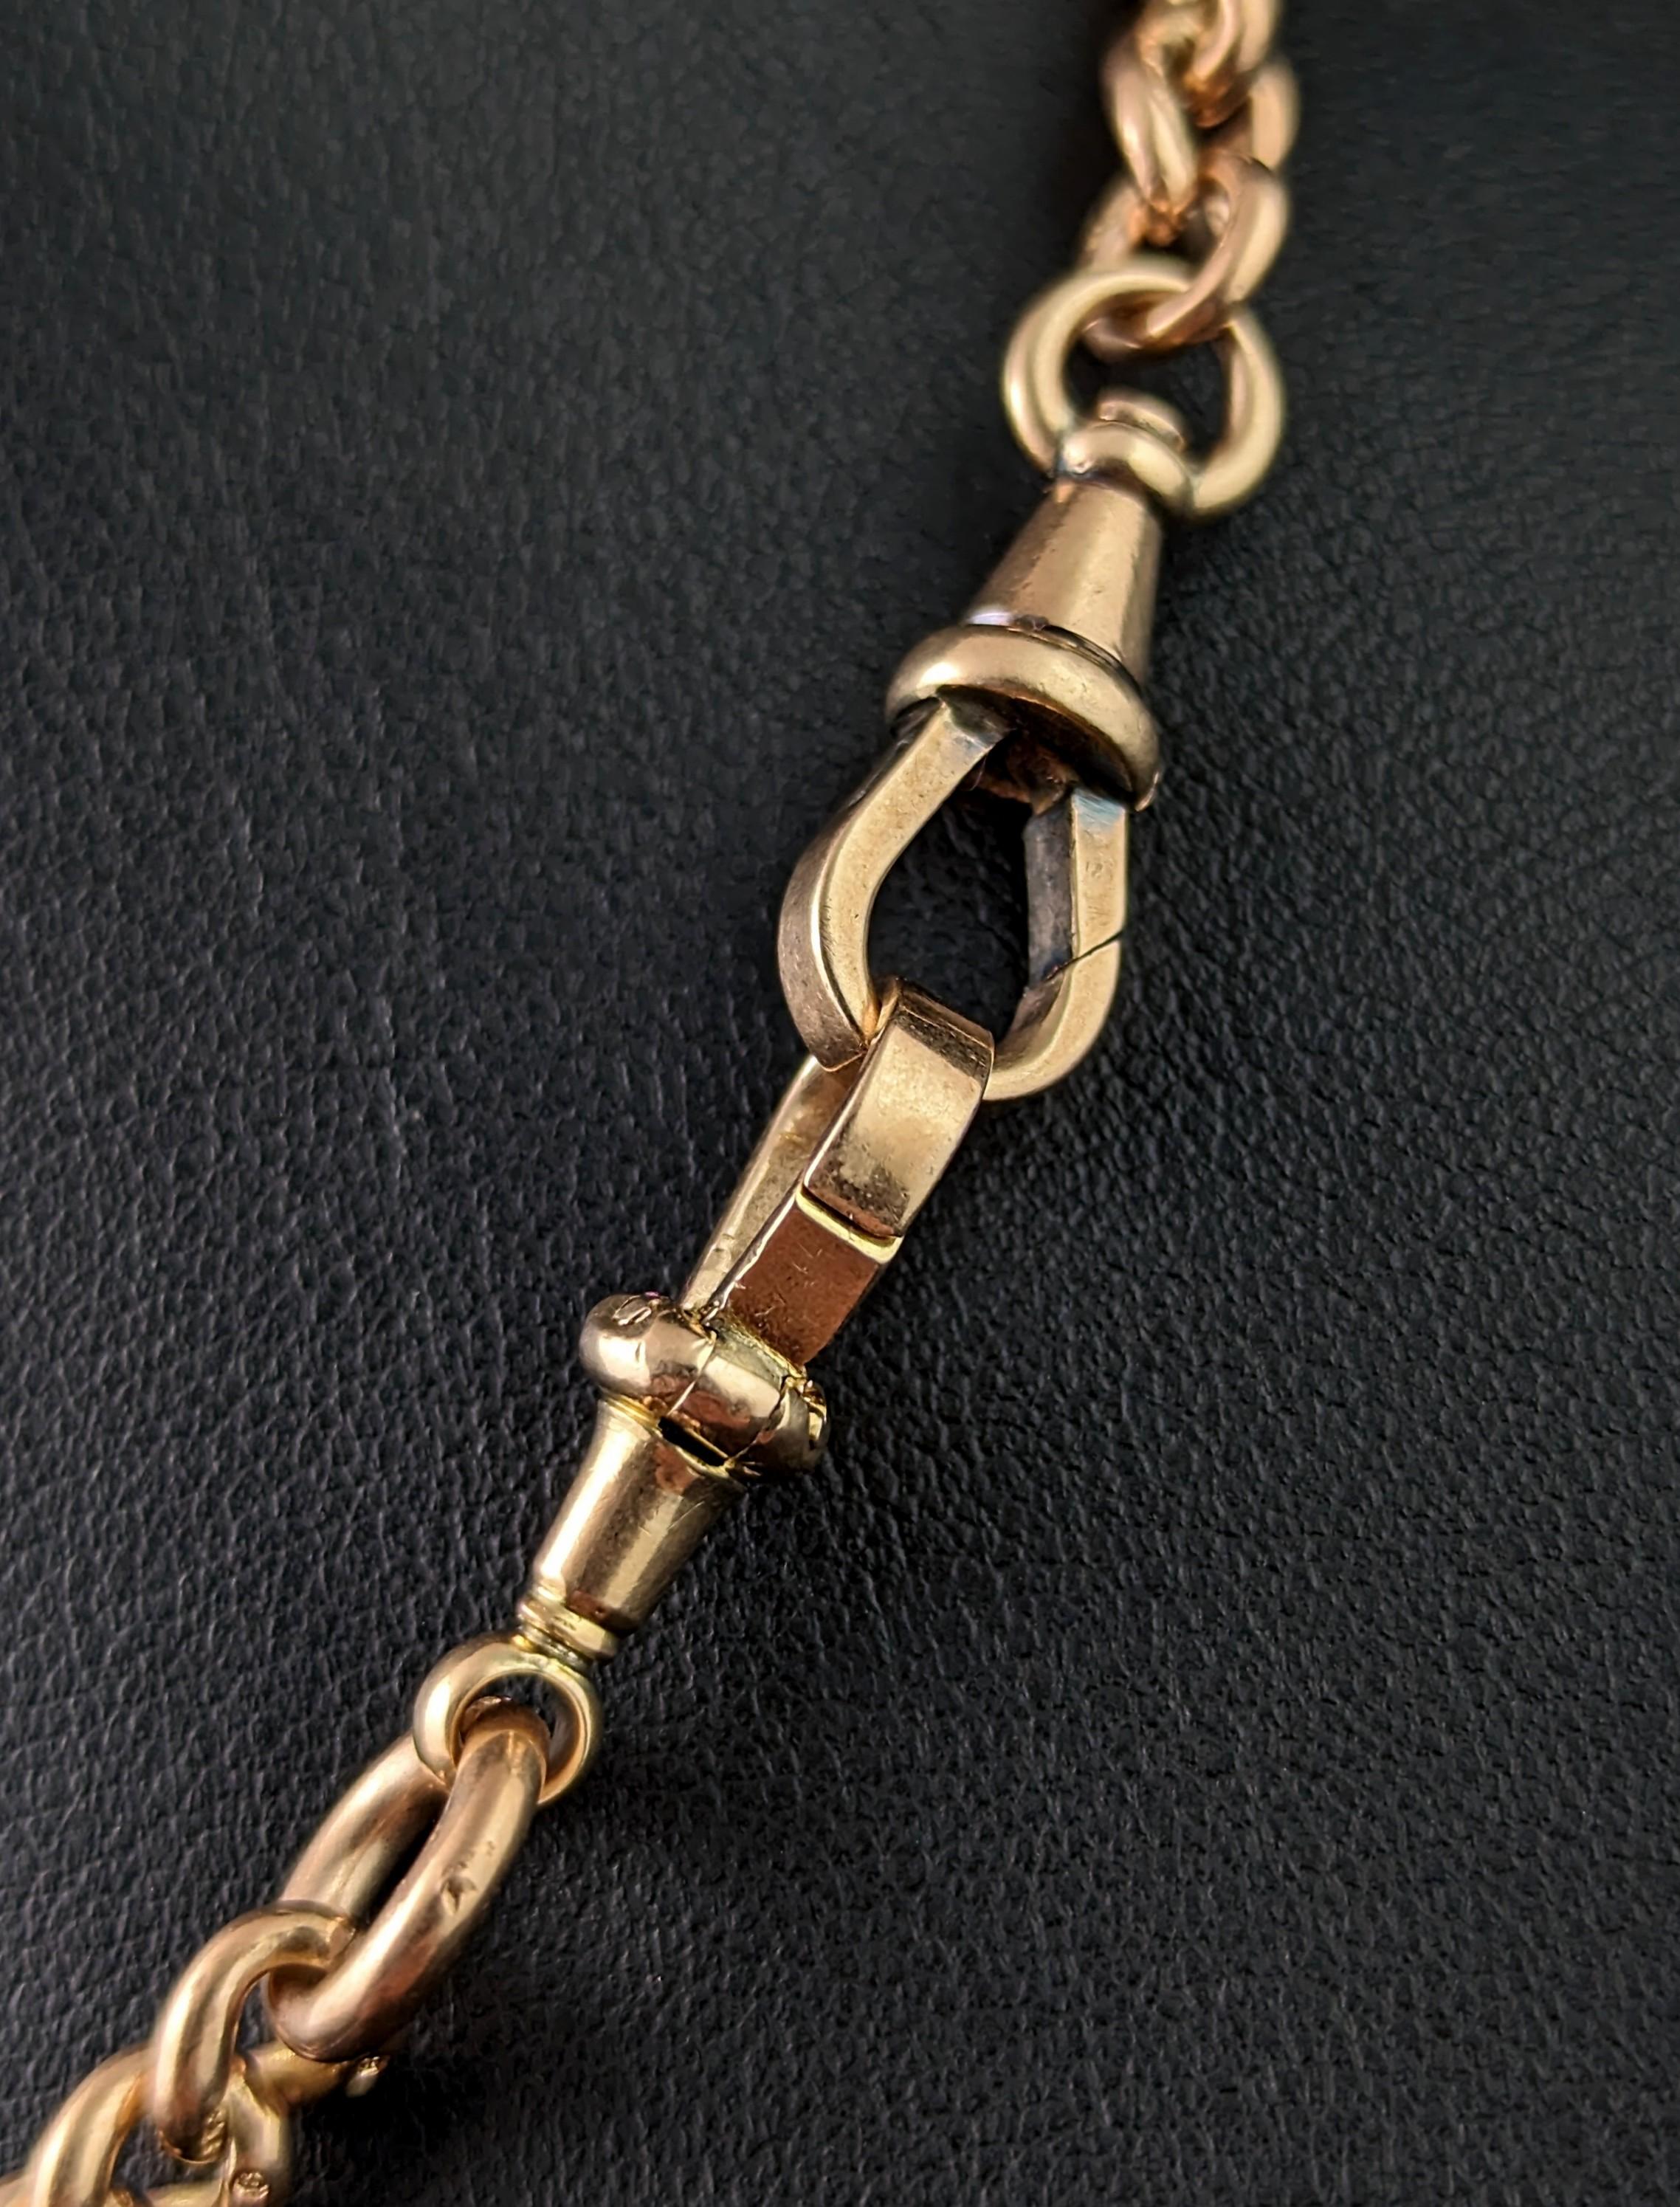 Antique 9k gold double Albert chain, watch chain necklace, Heavy  For Sale 5